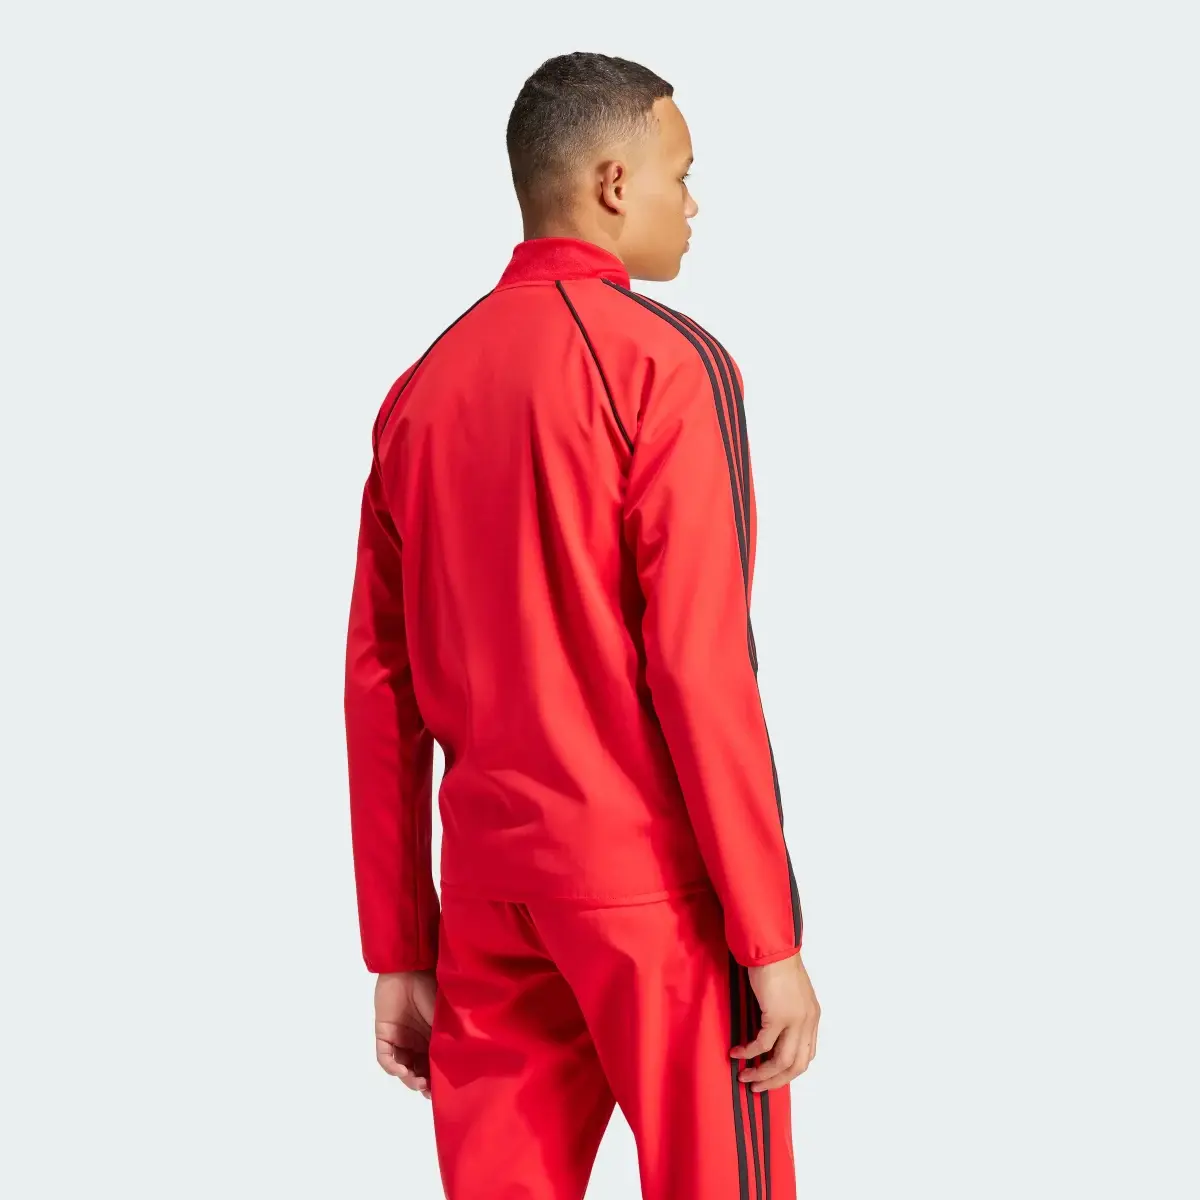 Adidas SST Bonded Track Top. 3